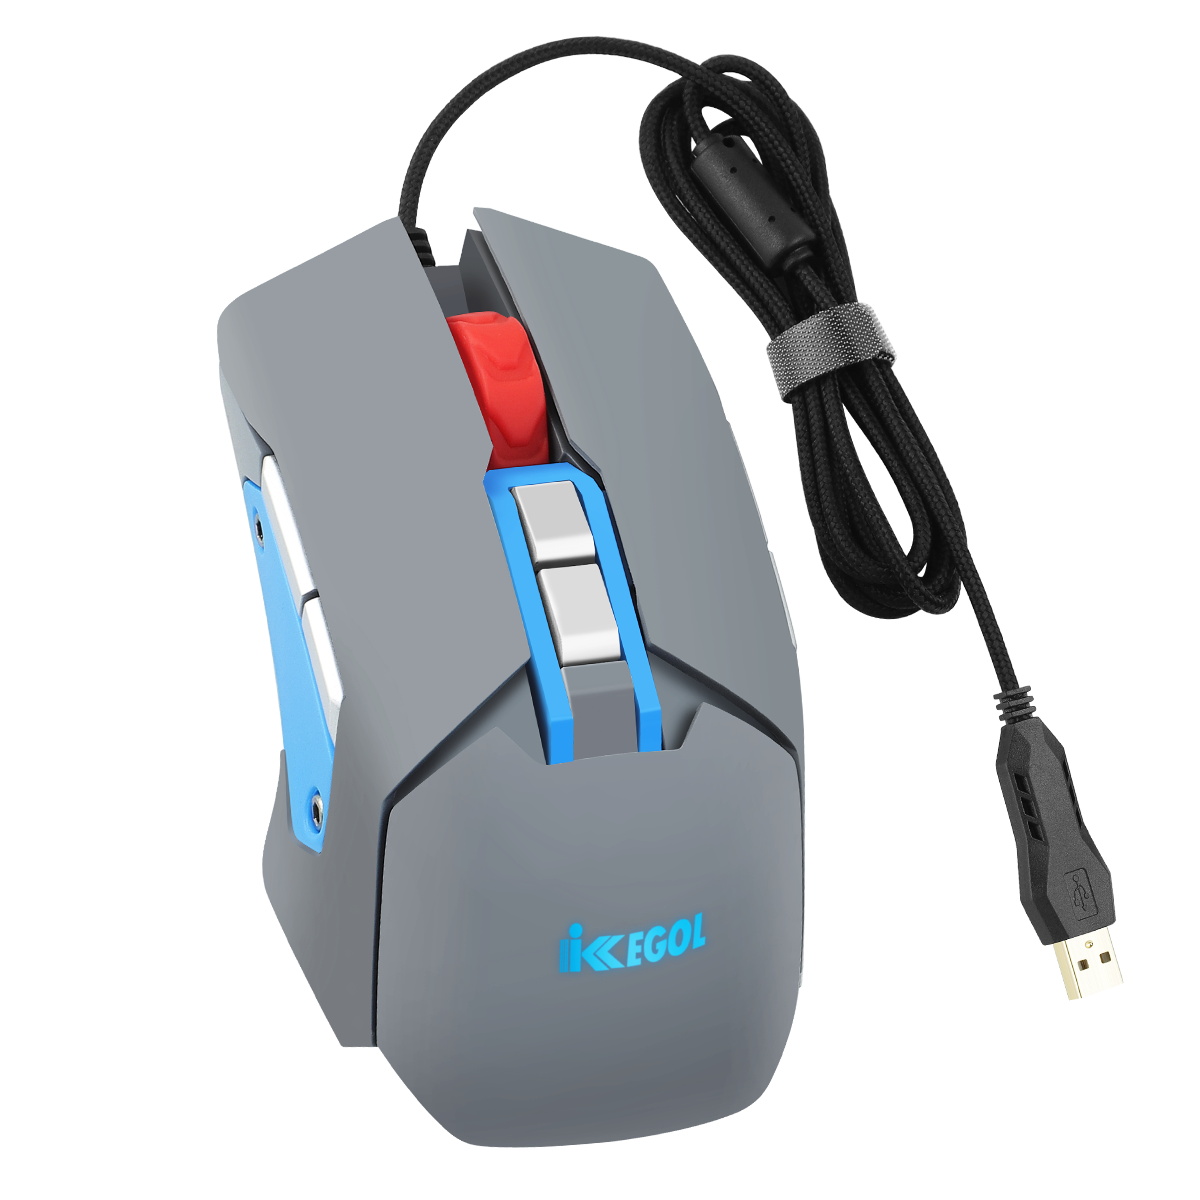 iKKEGOL USB Programmable Gaming Mouse with Speaker, microphone